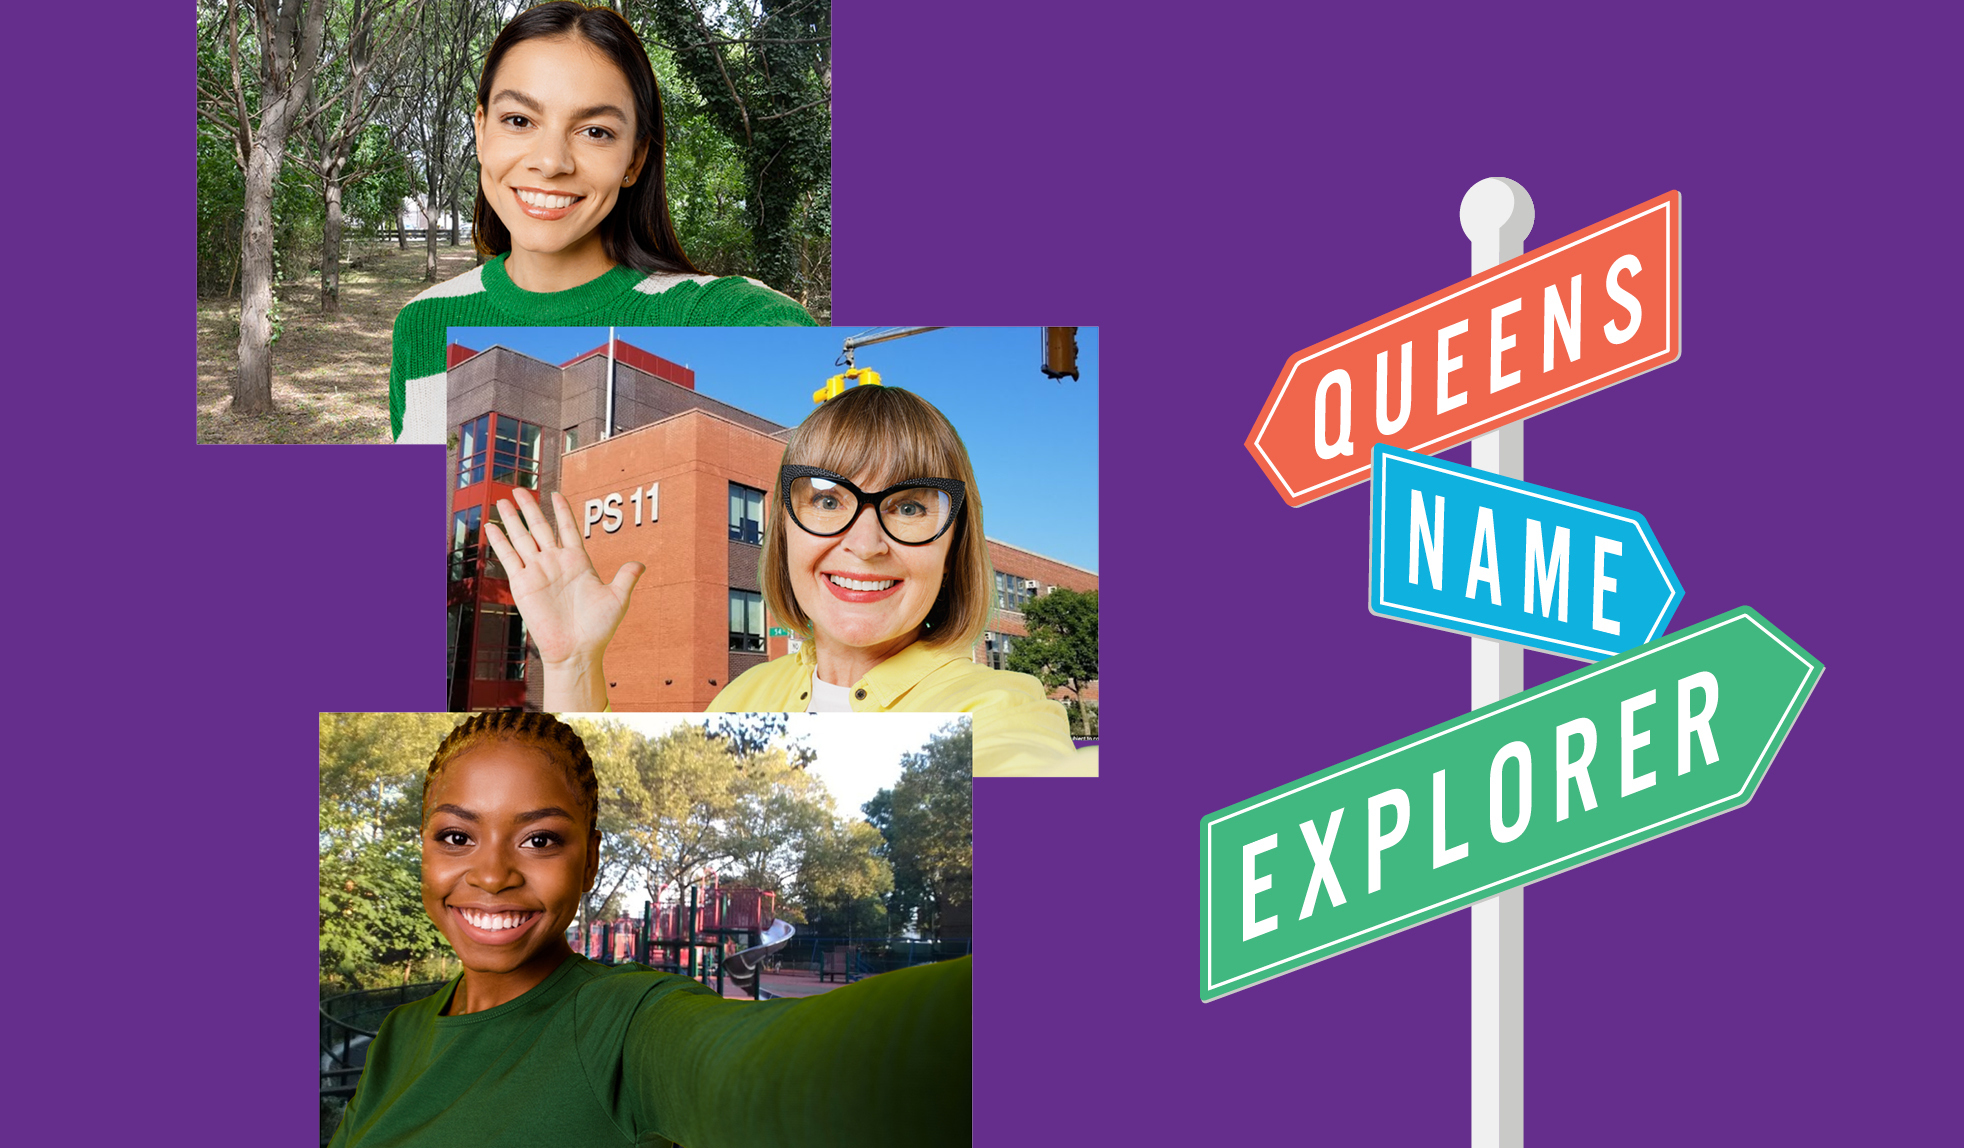 Use the Queens Name Explorer to enter our Women's History Month Sweepstakes!